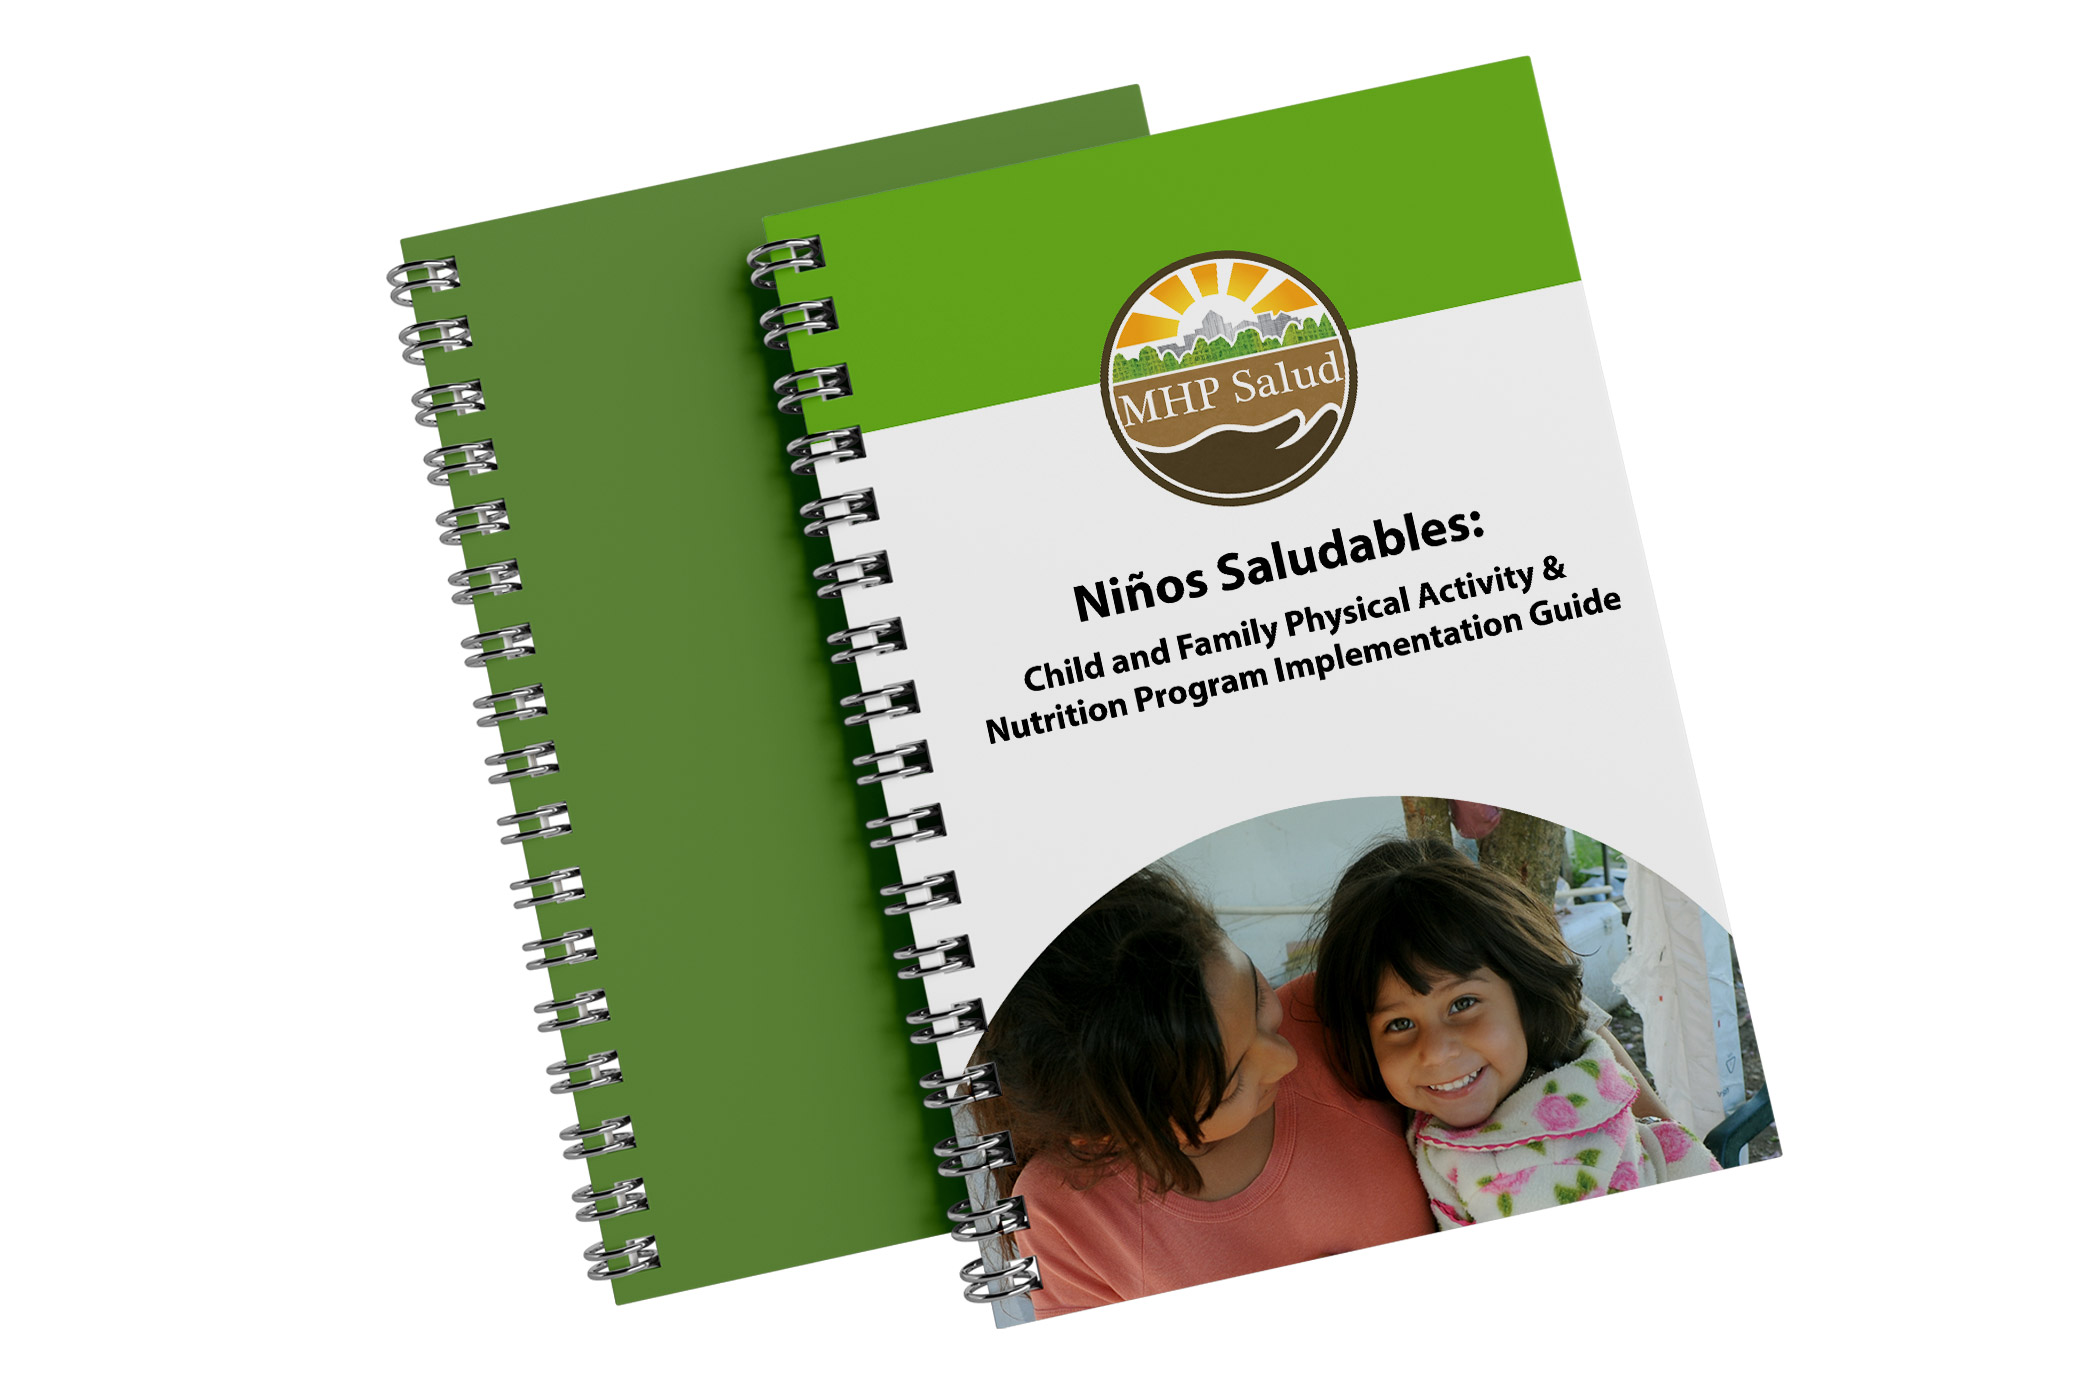 Niños Saludables: Child and Family Physical Activity & Nutrition Program Implementation Guide